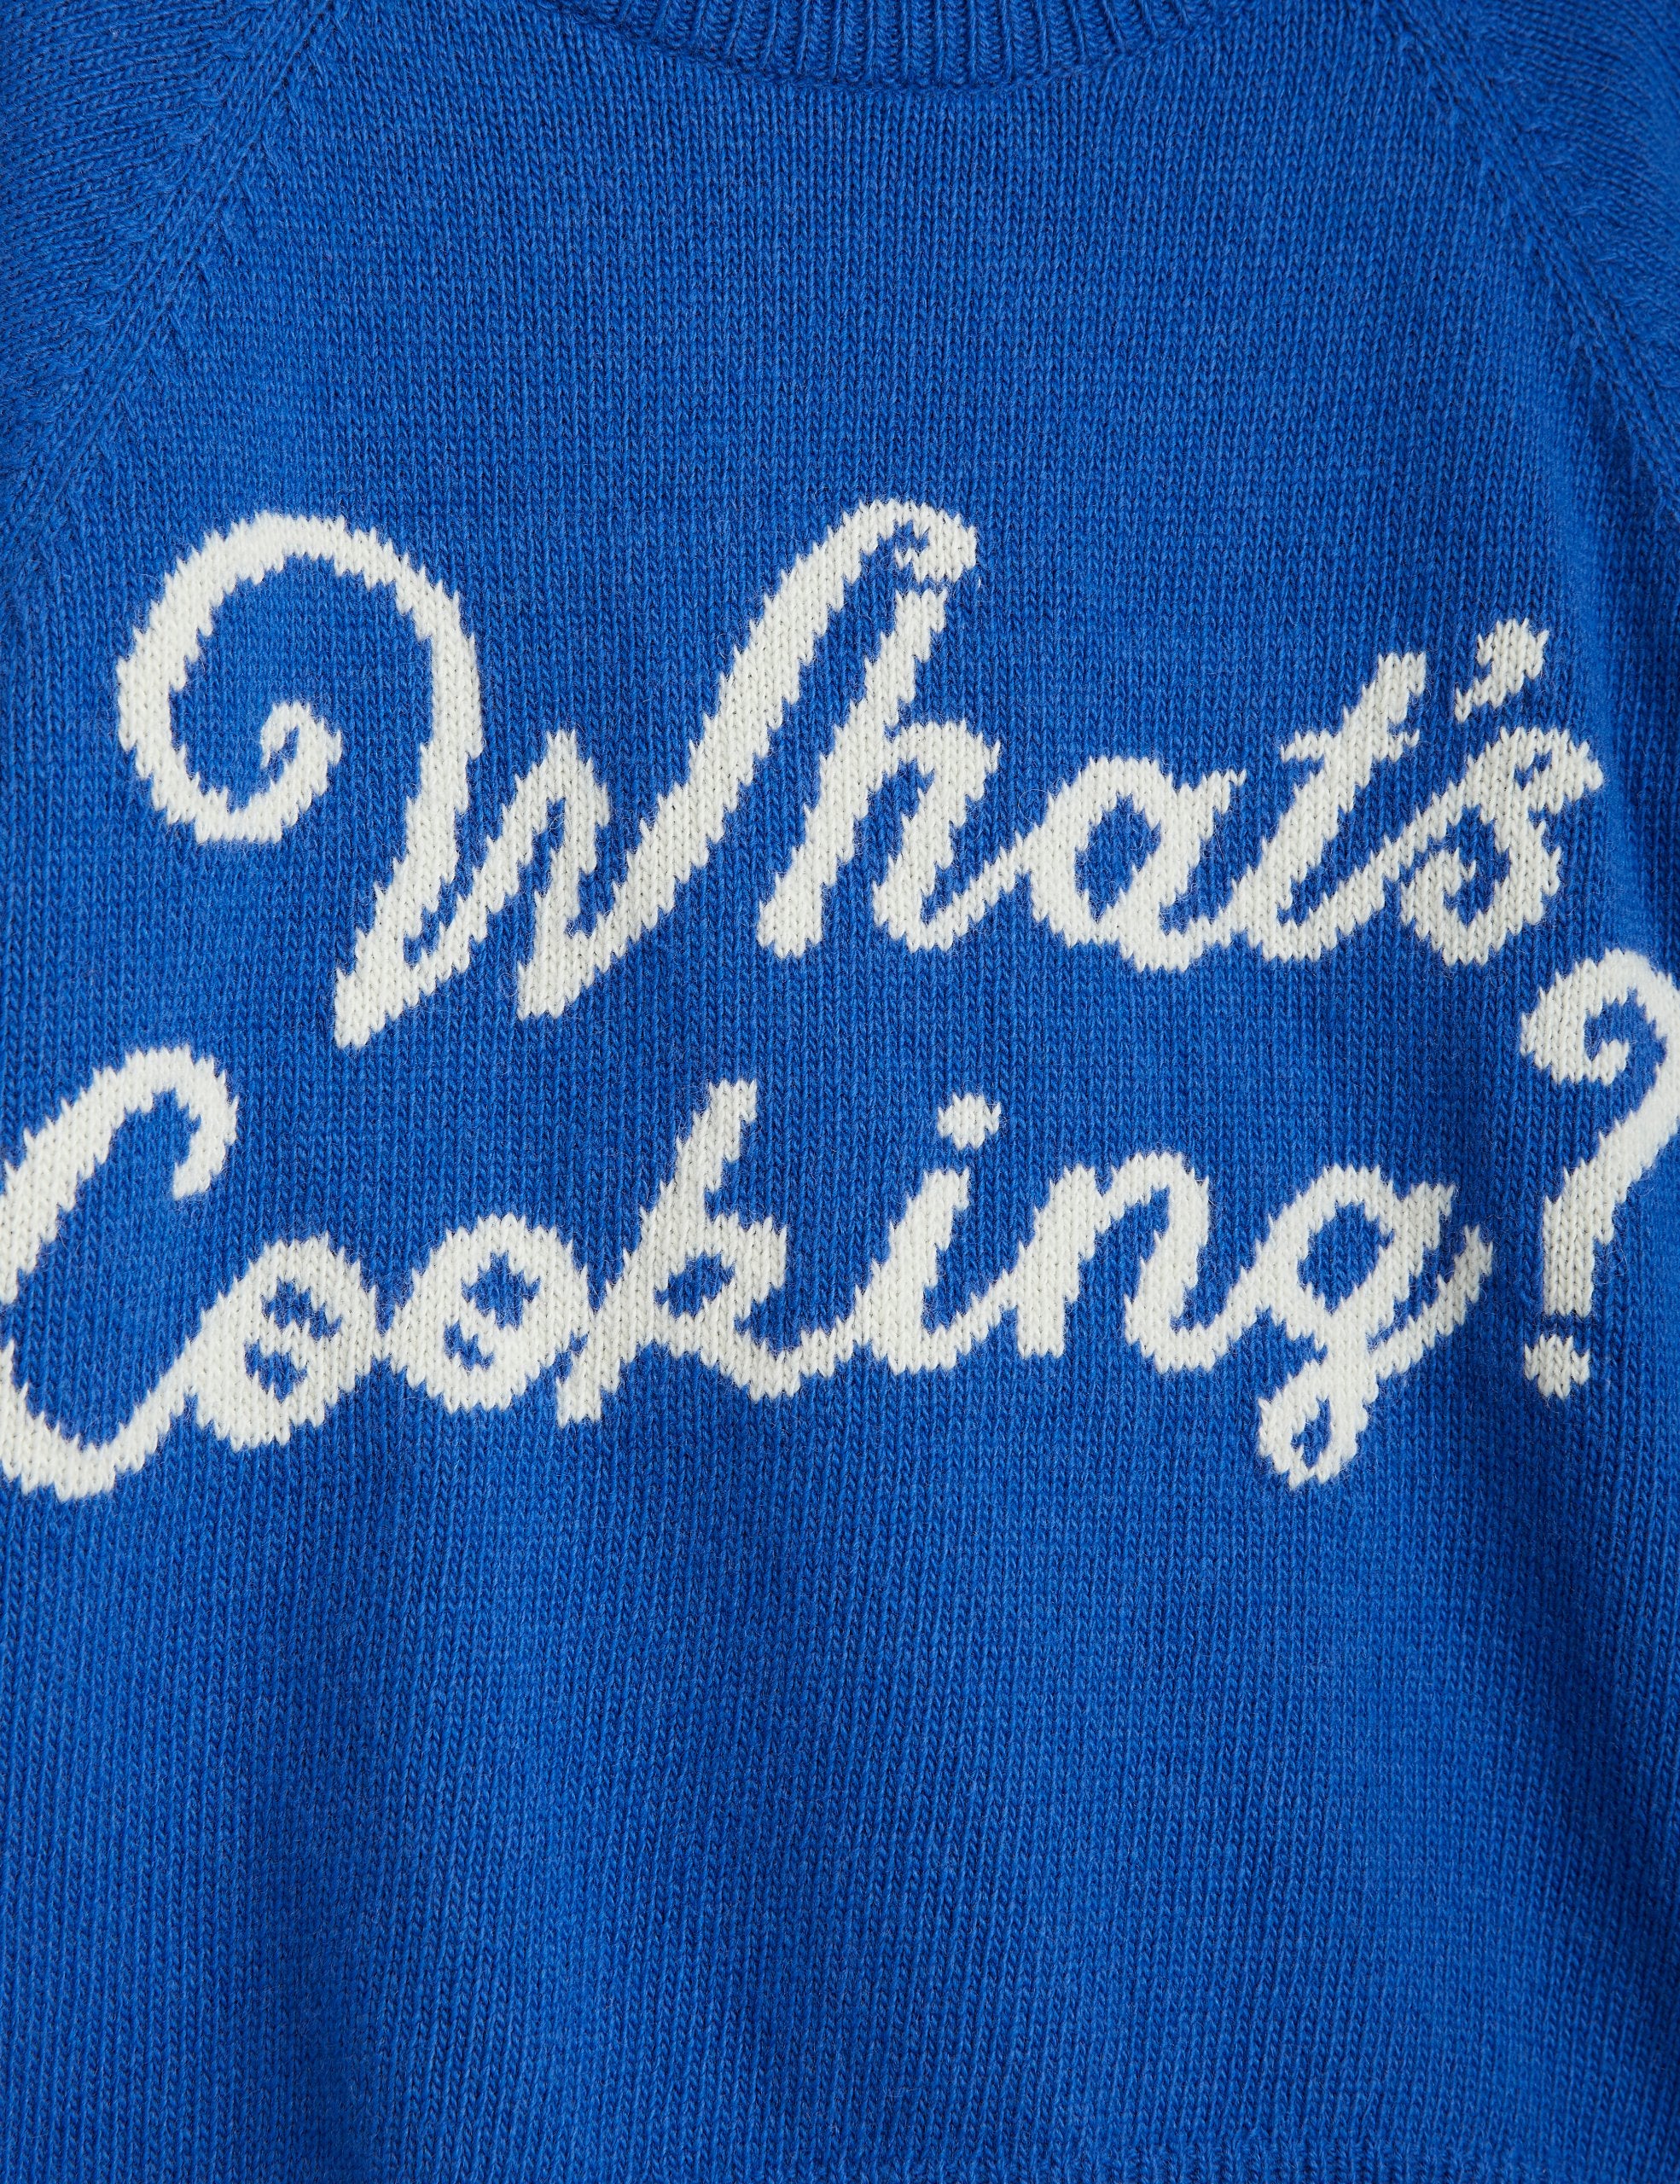 What's cooking knitted sweater